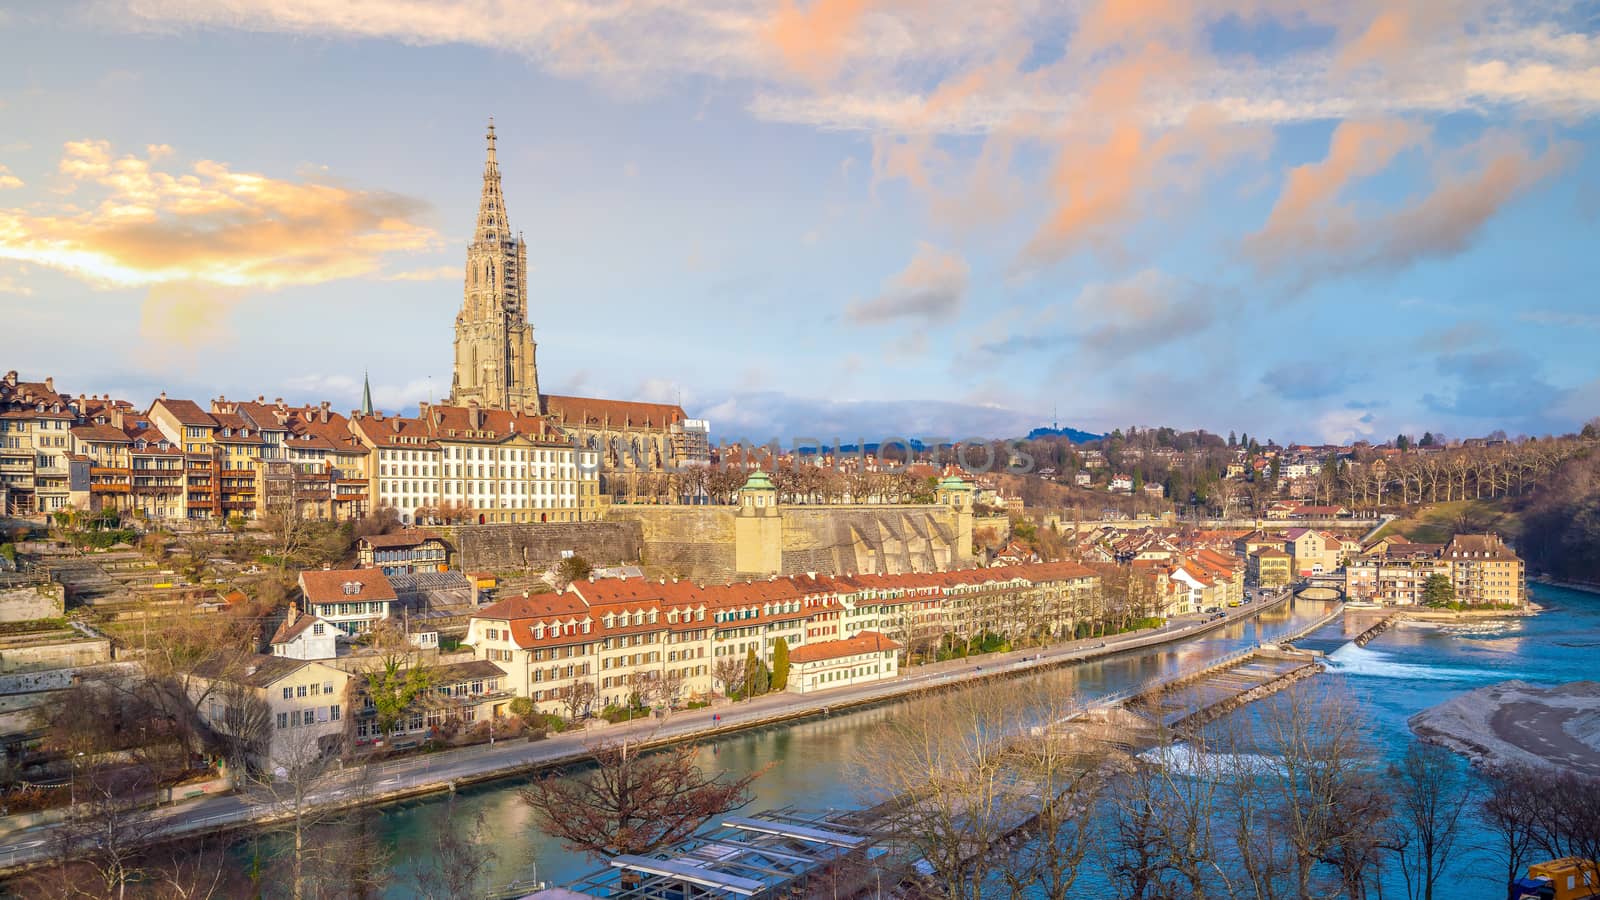 Old Town of Bern, capital of Switzerland by f11photo